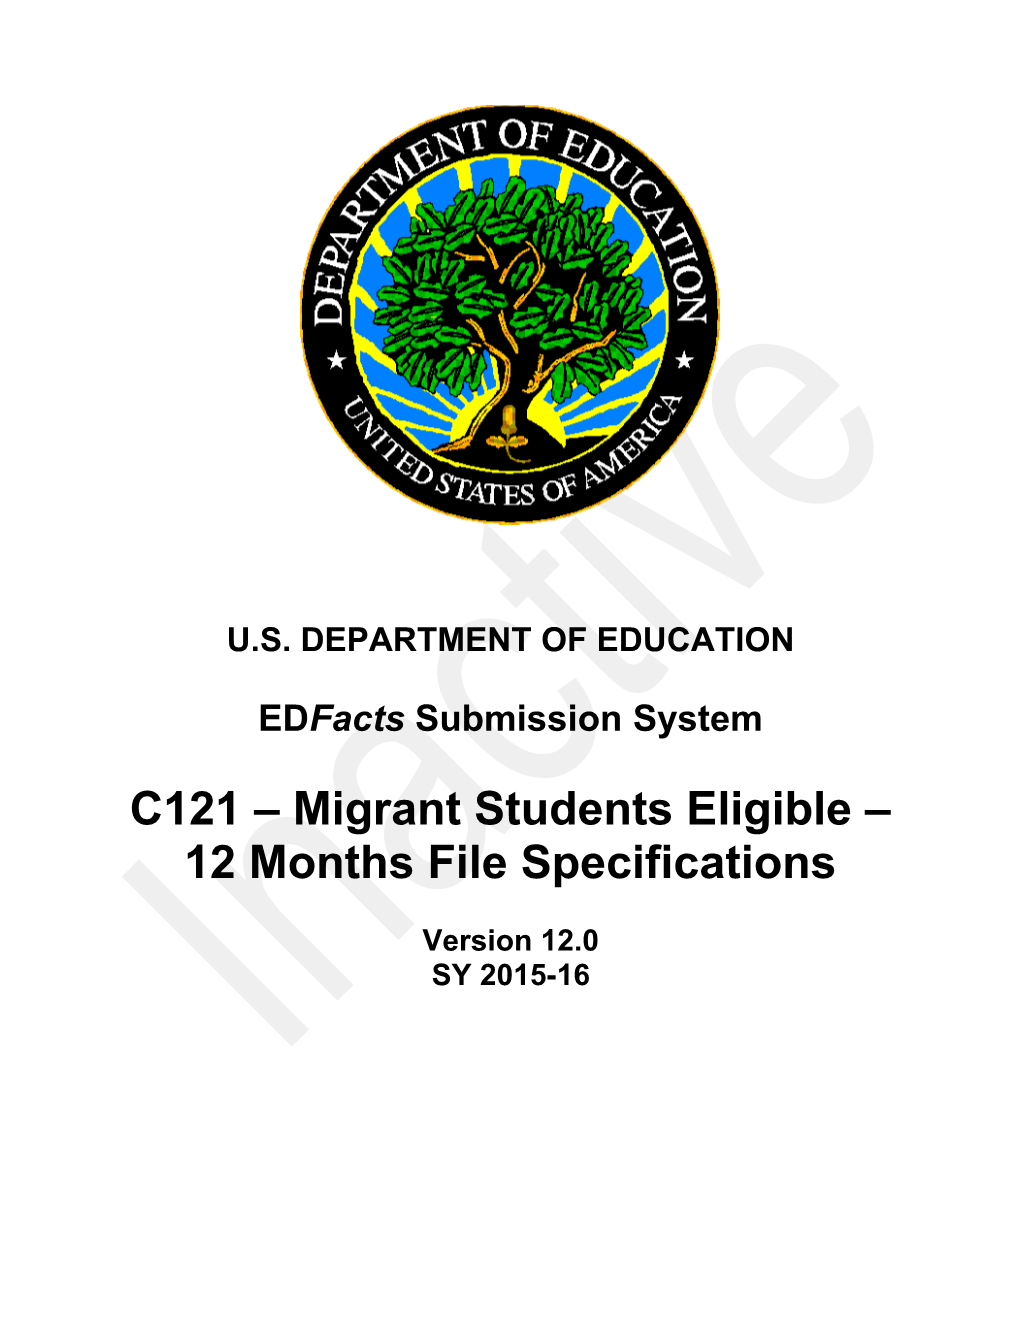 Migrant Students Eligible- 12 Months File Specifications